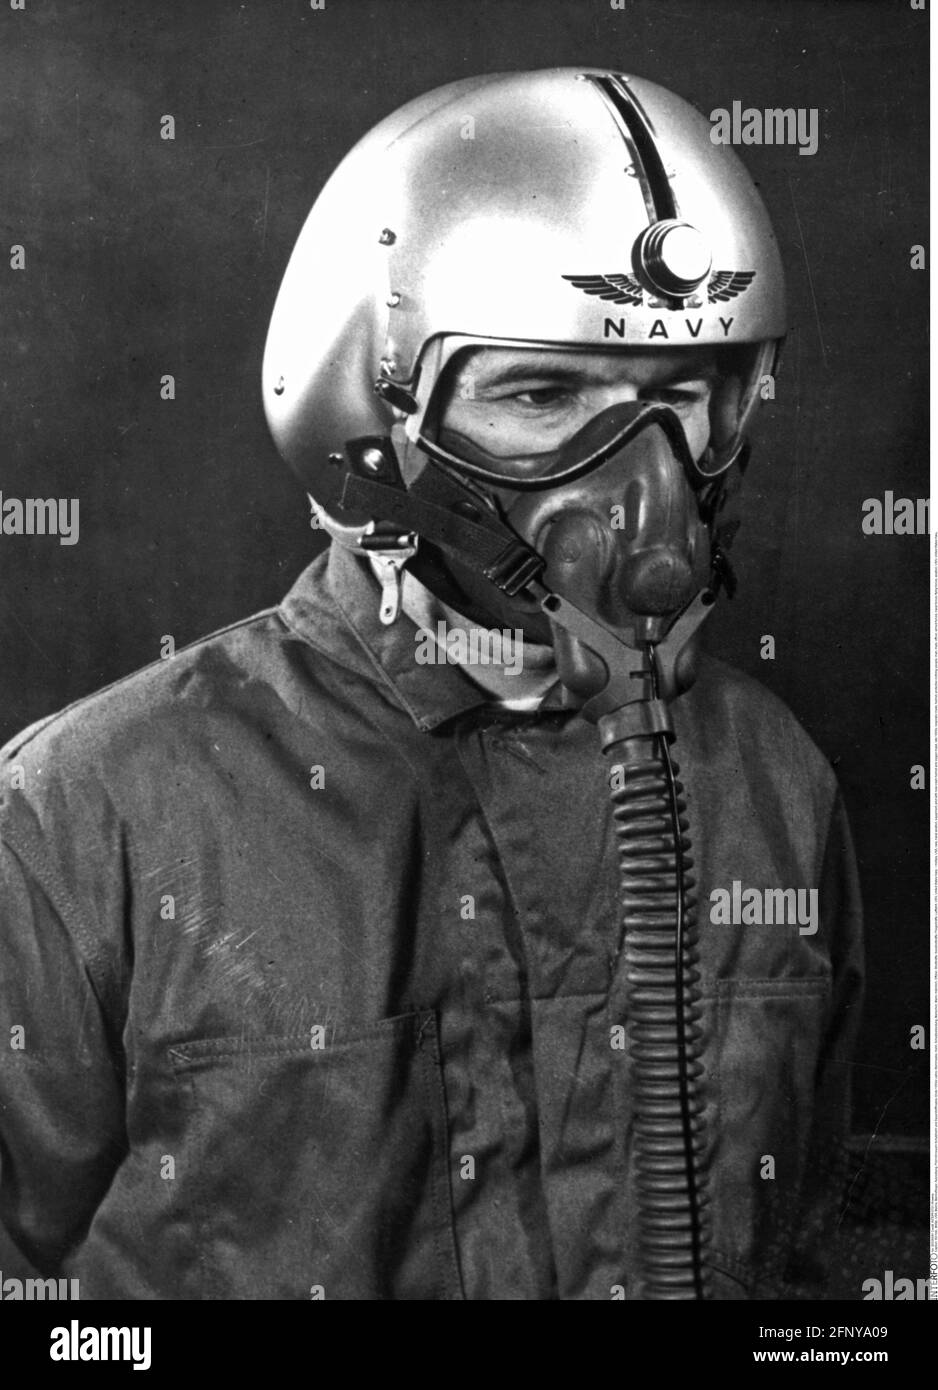 military, USA, navy, naval aviation, equipment, pilot with new crash helmet and oxygen mask, ADDITIONAL-RIGHTS-CLEARANCE-INFO-NOT-AVAILABLE Stock Photo